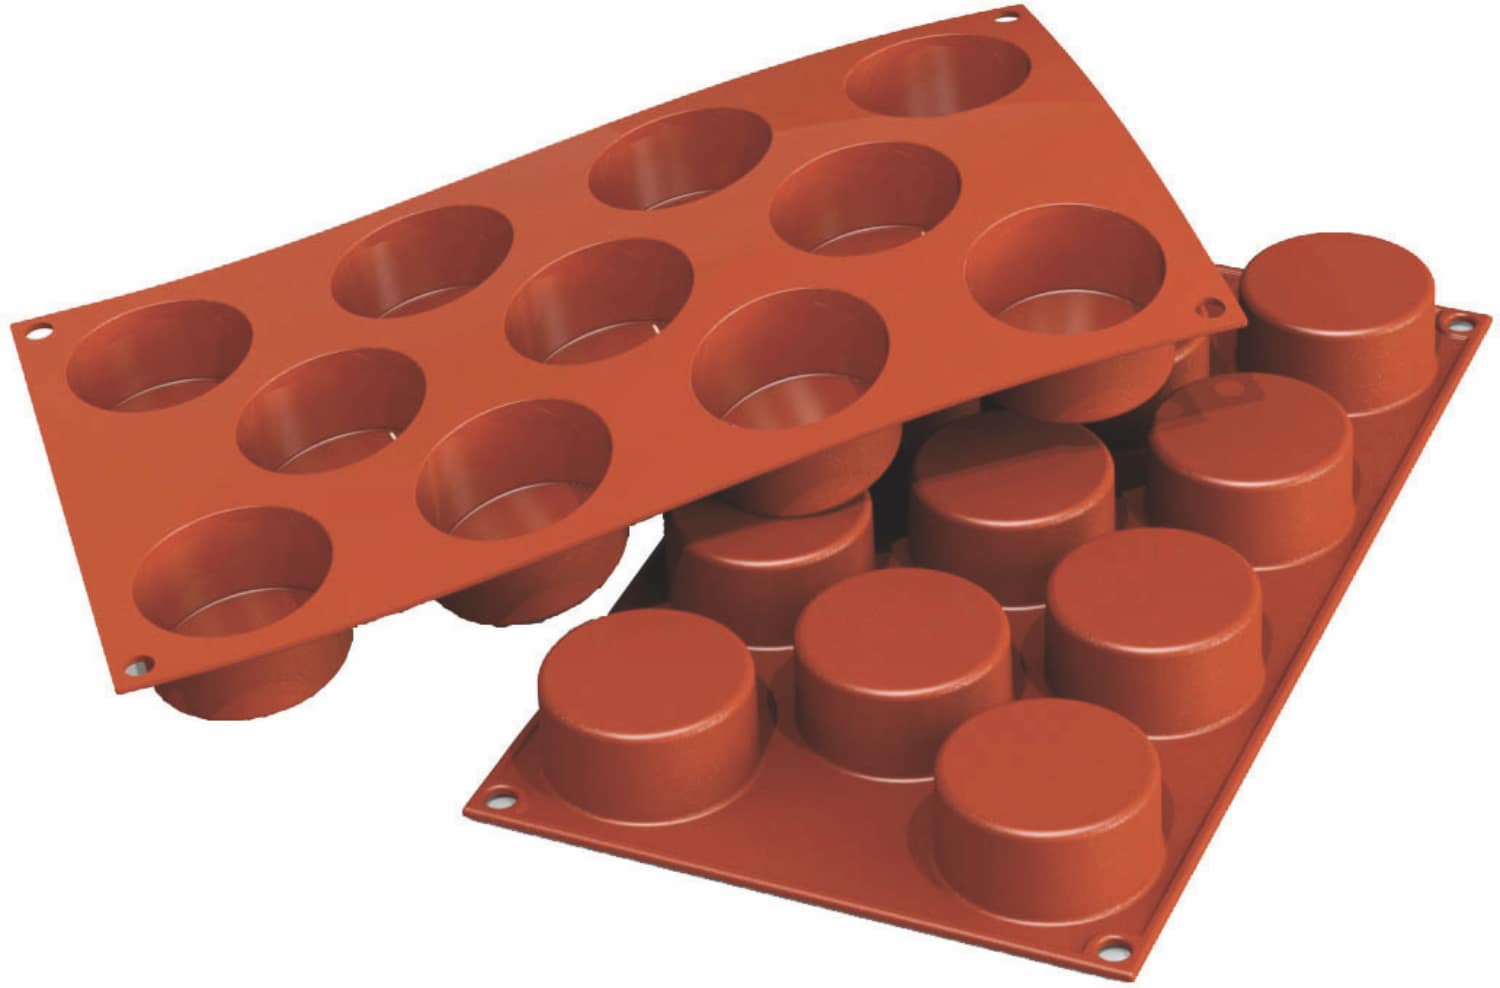 Silicone baking moulds "Cylinder" 300 x 175 mm